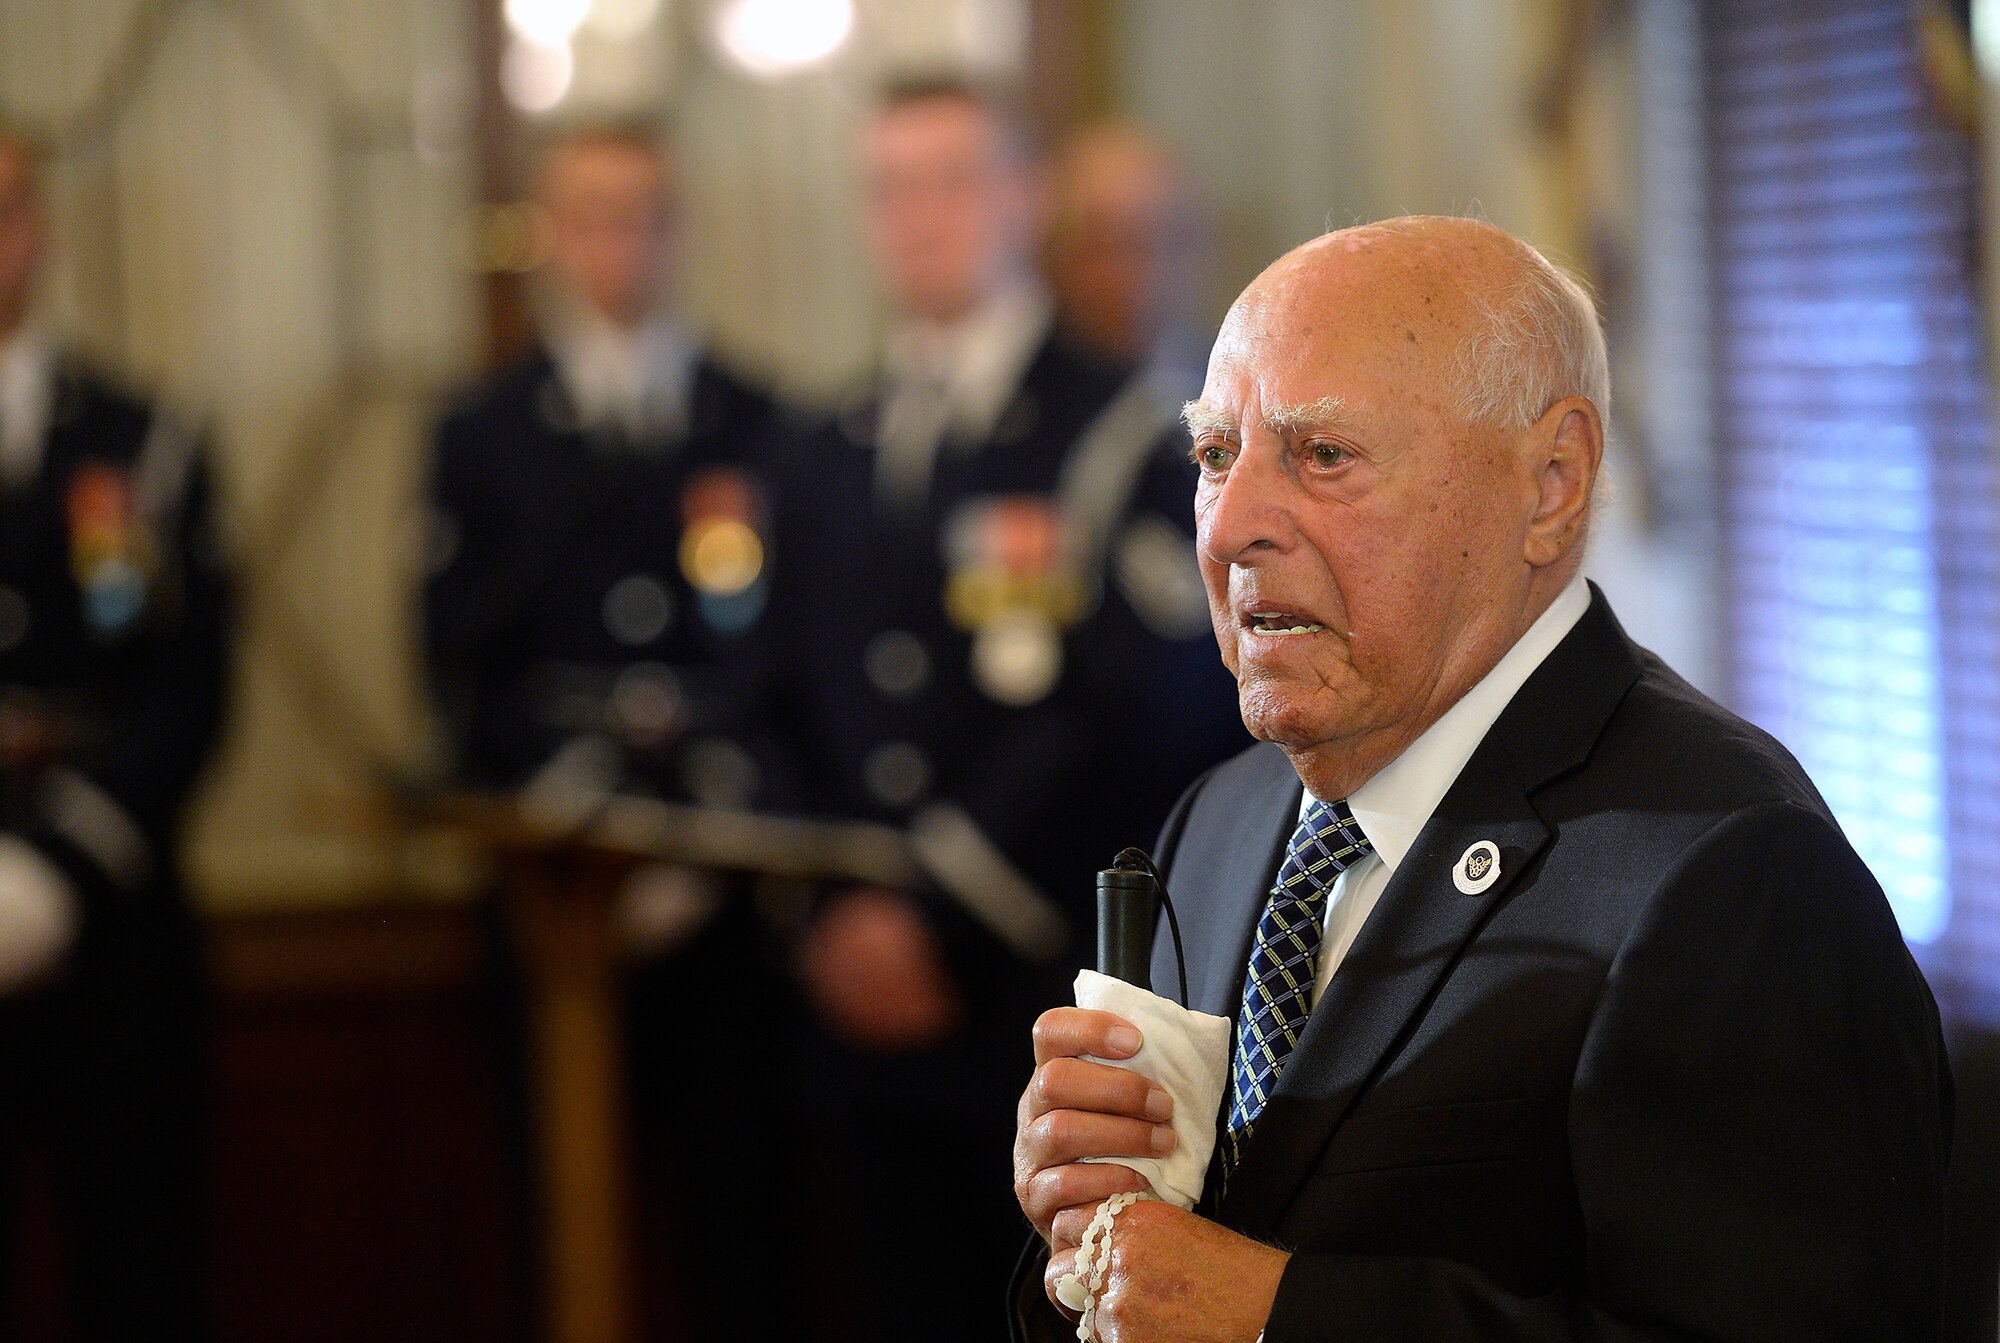 Second Lt. John Pedevillano, a WWII Army Air Corps B-17 bombardier, makes remarks after Air Force Vice Chief of Staff Gen. Larry O. Spencer and Sen. John McCain presented him the Presidential Unit Citation with one oak leaf cluster in Washington, D.C., July 7, 2015. Pedevillano accepted the award as the last survivor of his WWII unit. (U.S. Air Force photo/Scott M. Ash)